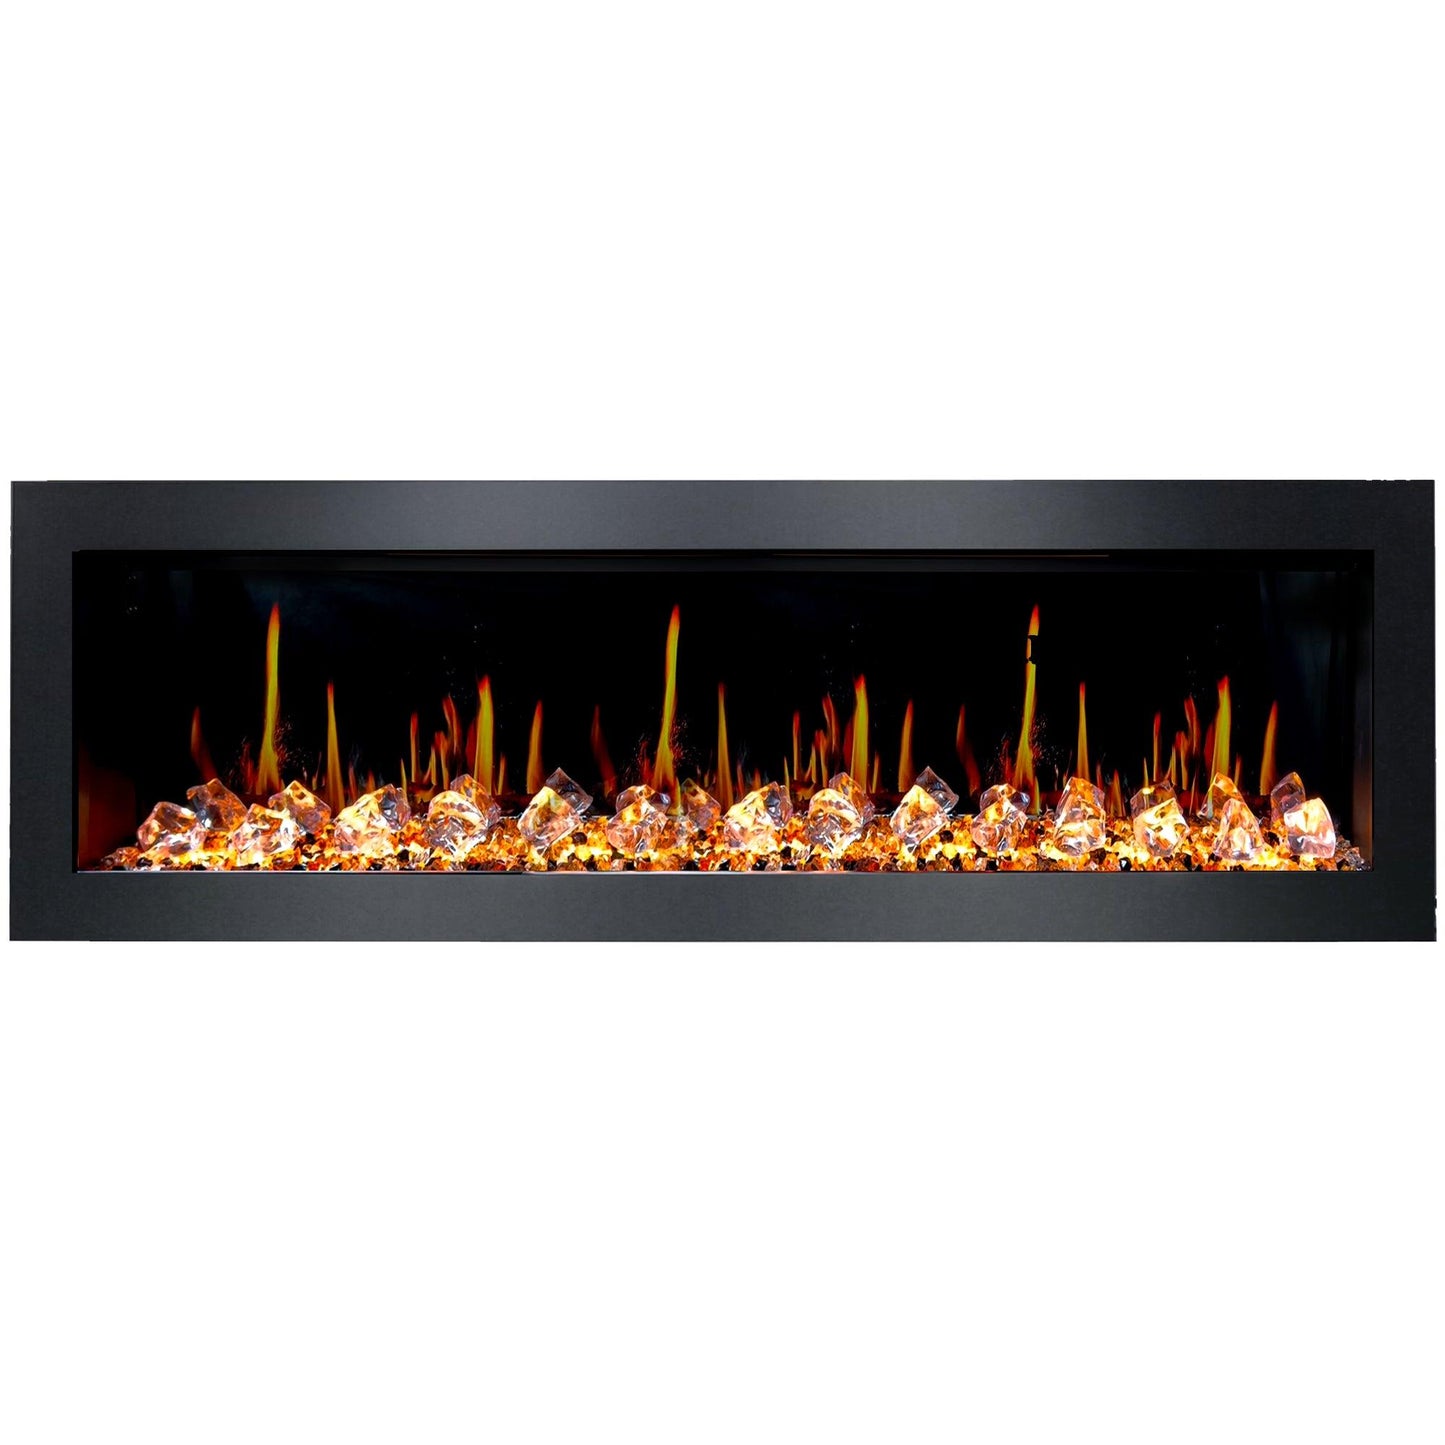 ZopaFlame™ 78" Linear Wall-mount Electric Fireplace - BC19788V - ZopaFlame Fireplaces